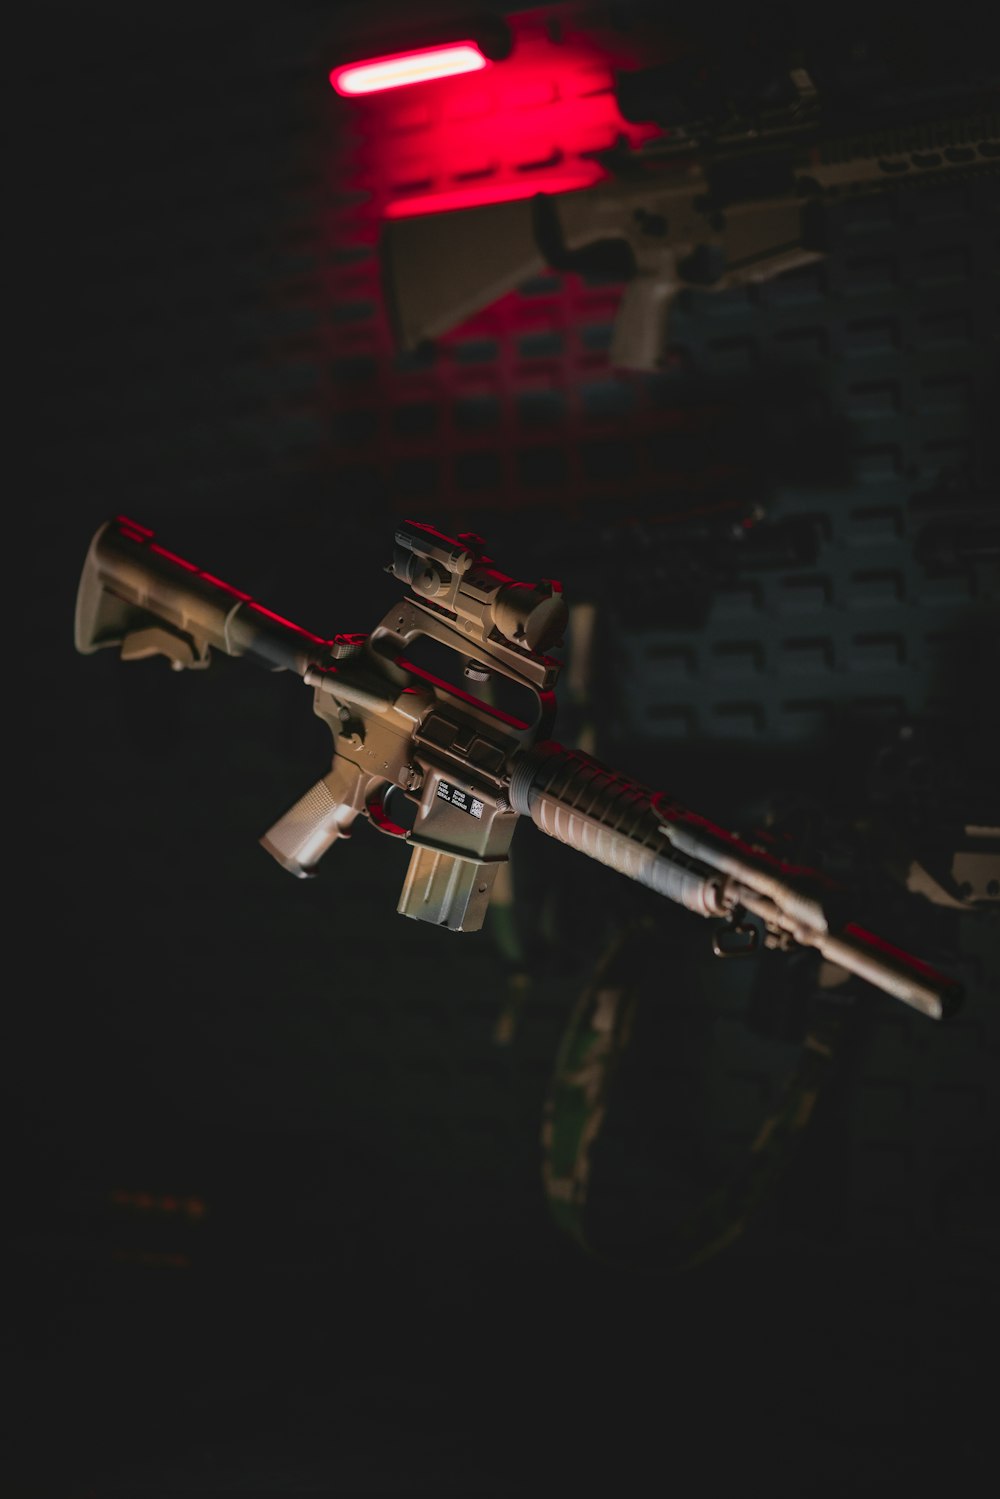 a toy gun hanging from the ceiling in a dark room